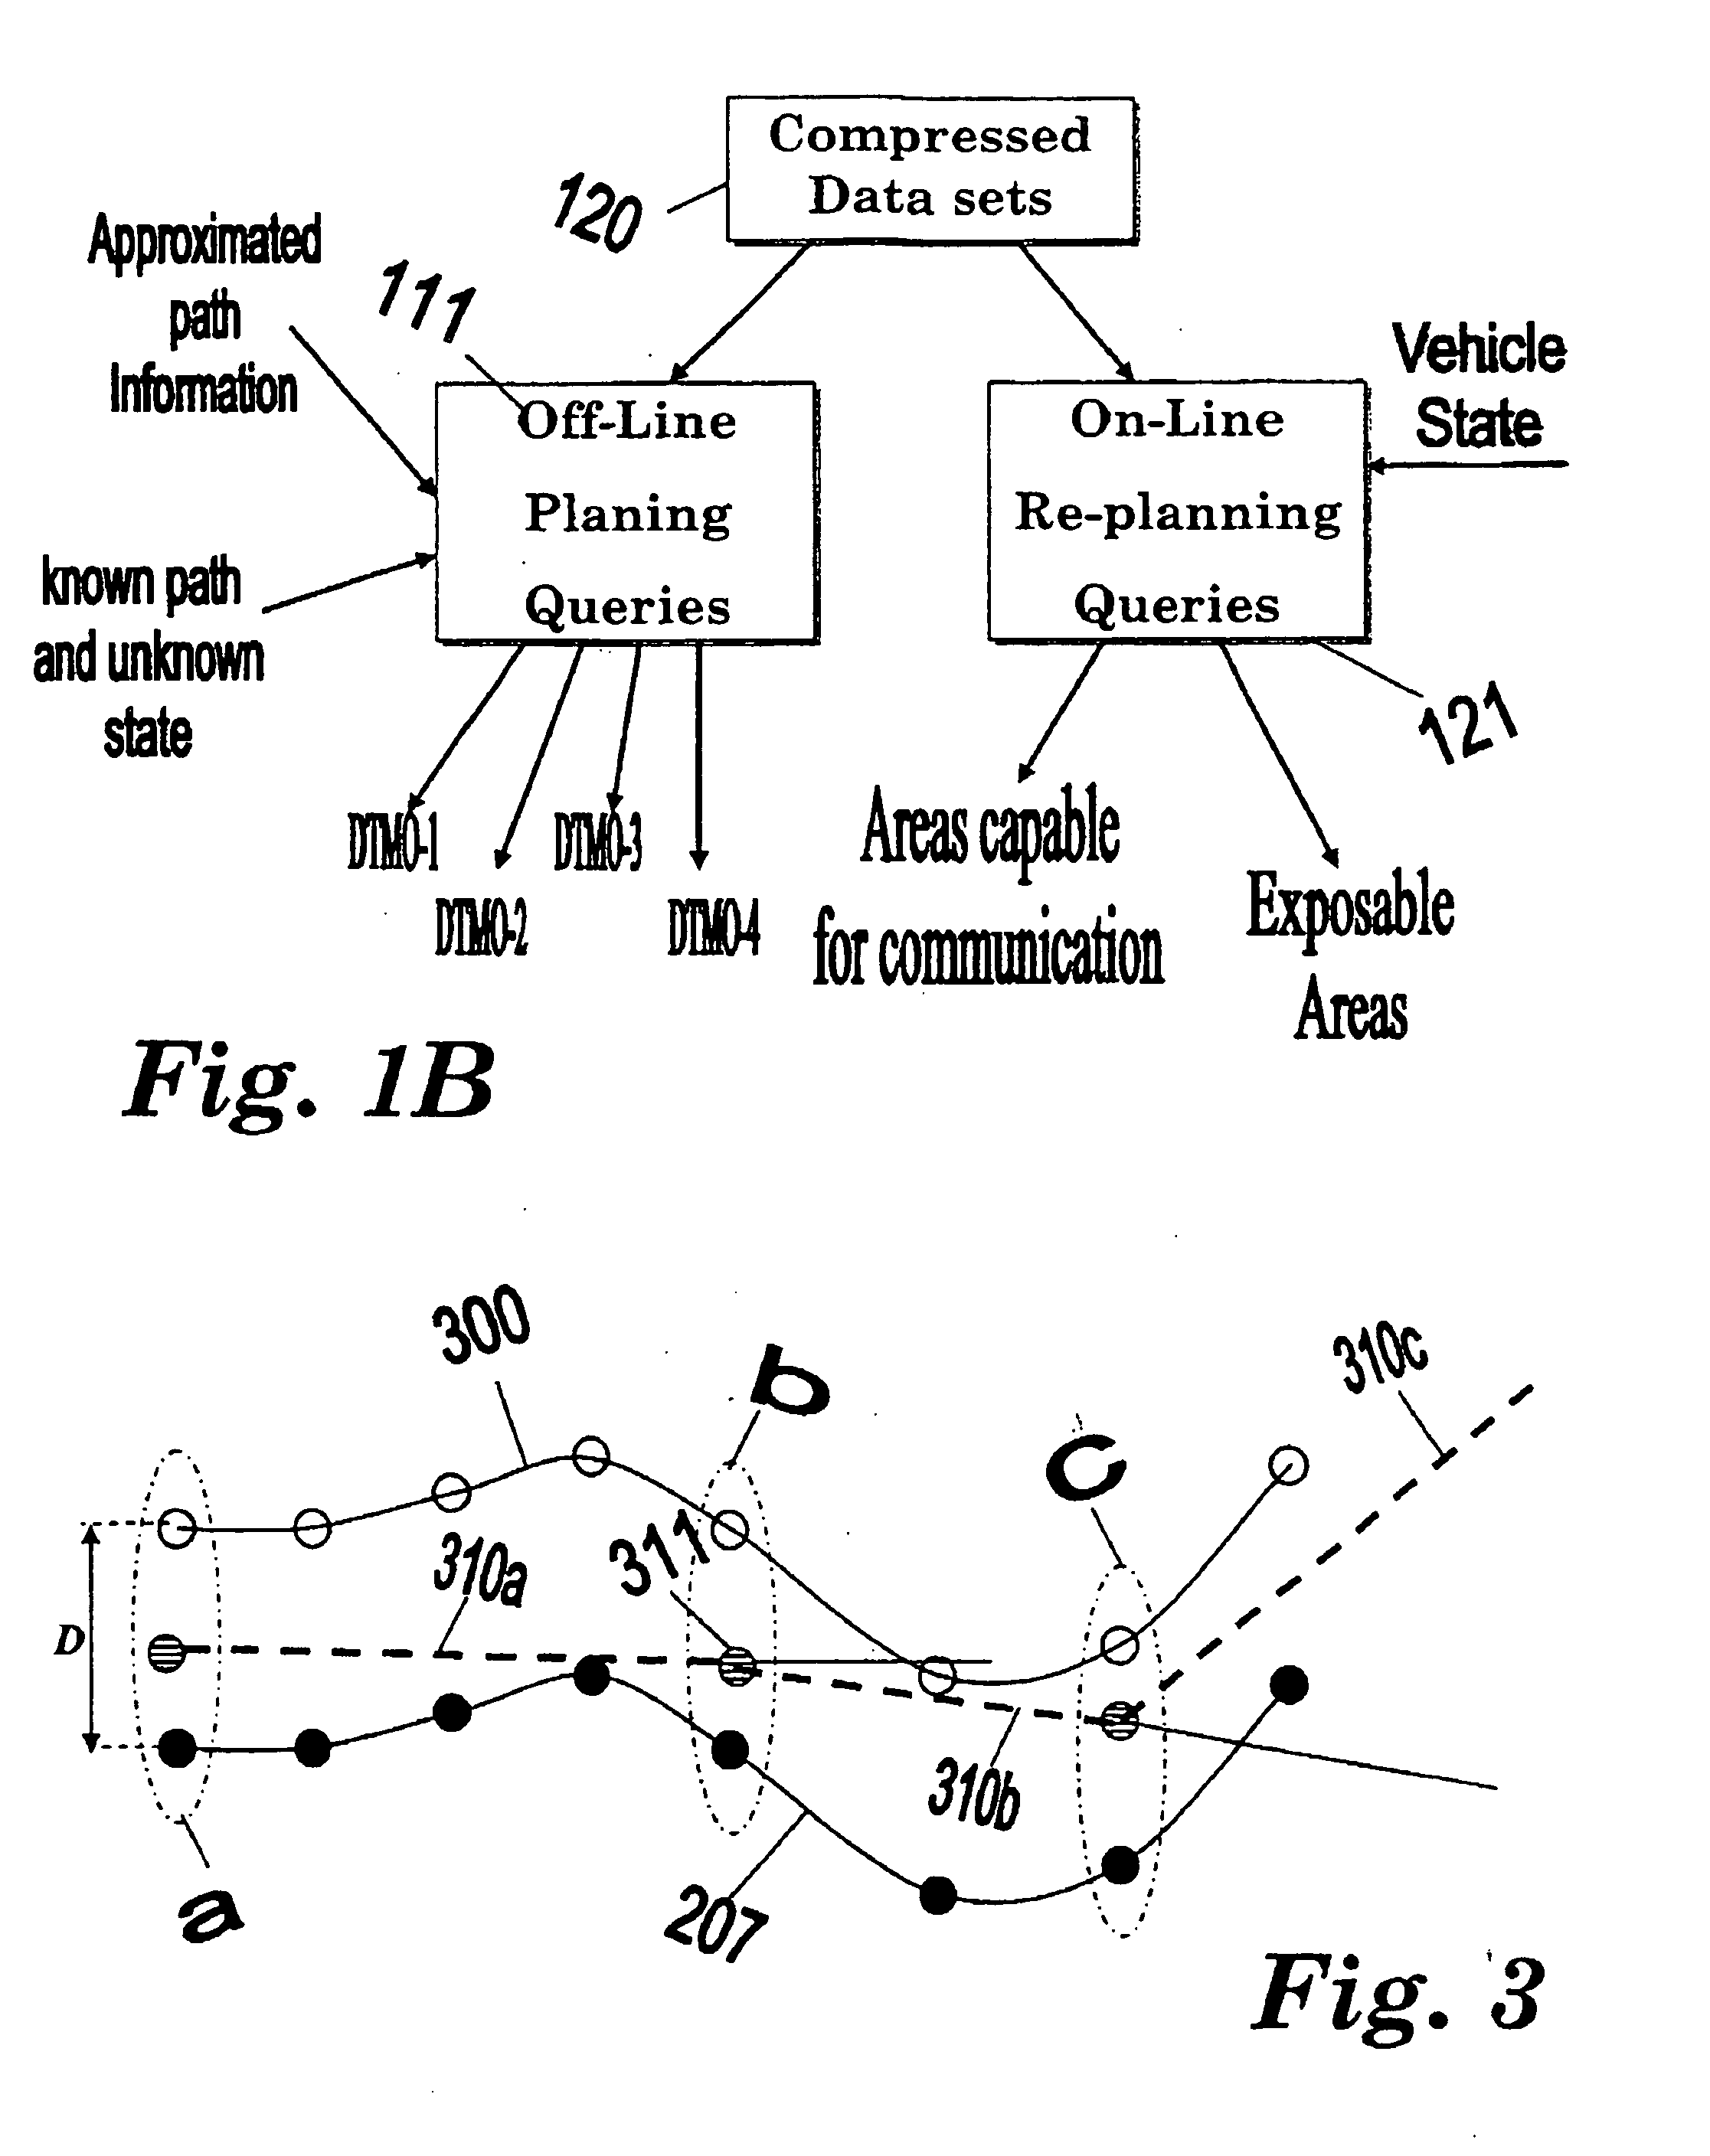 Method and system for processing and analyzing digital terrain data